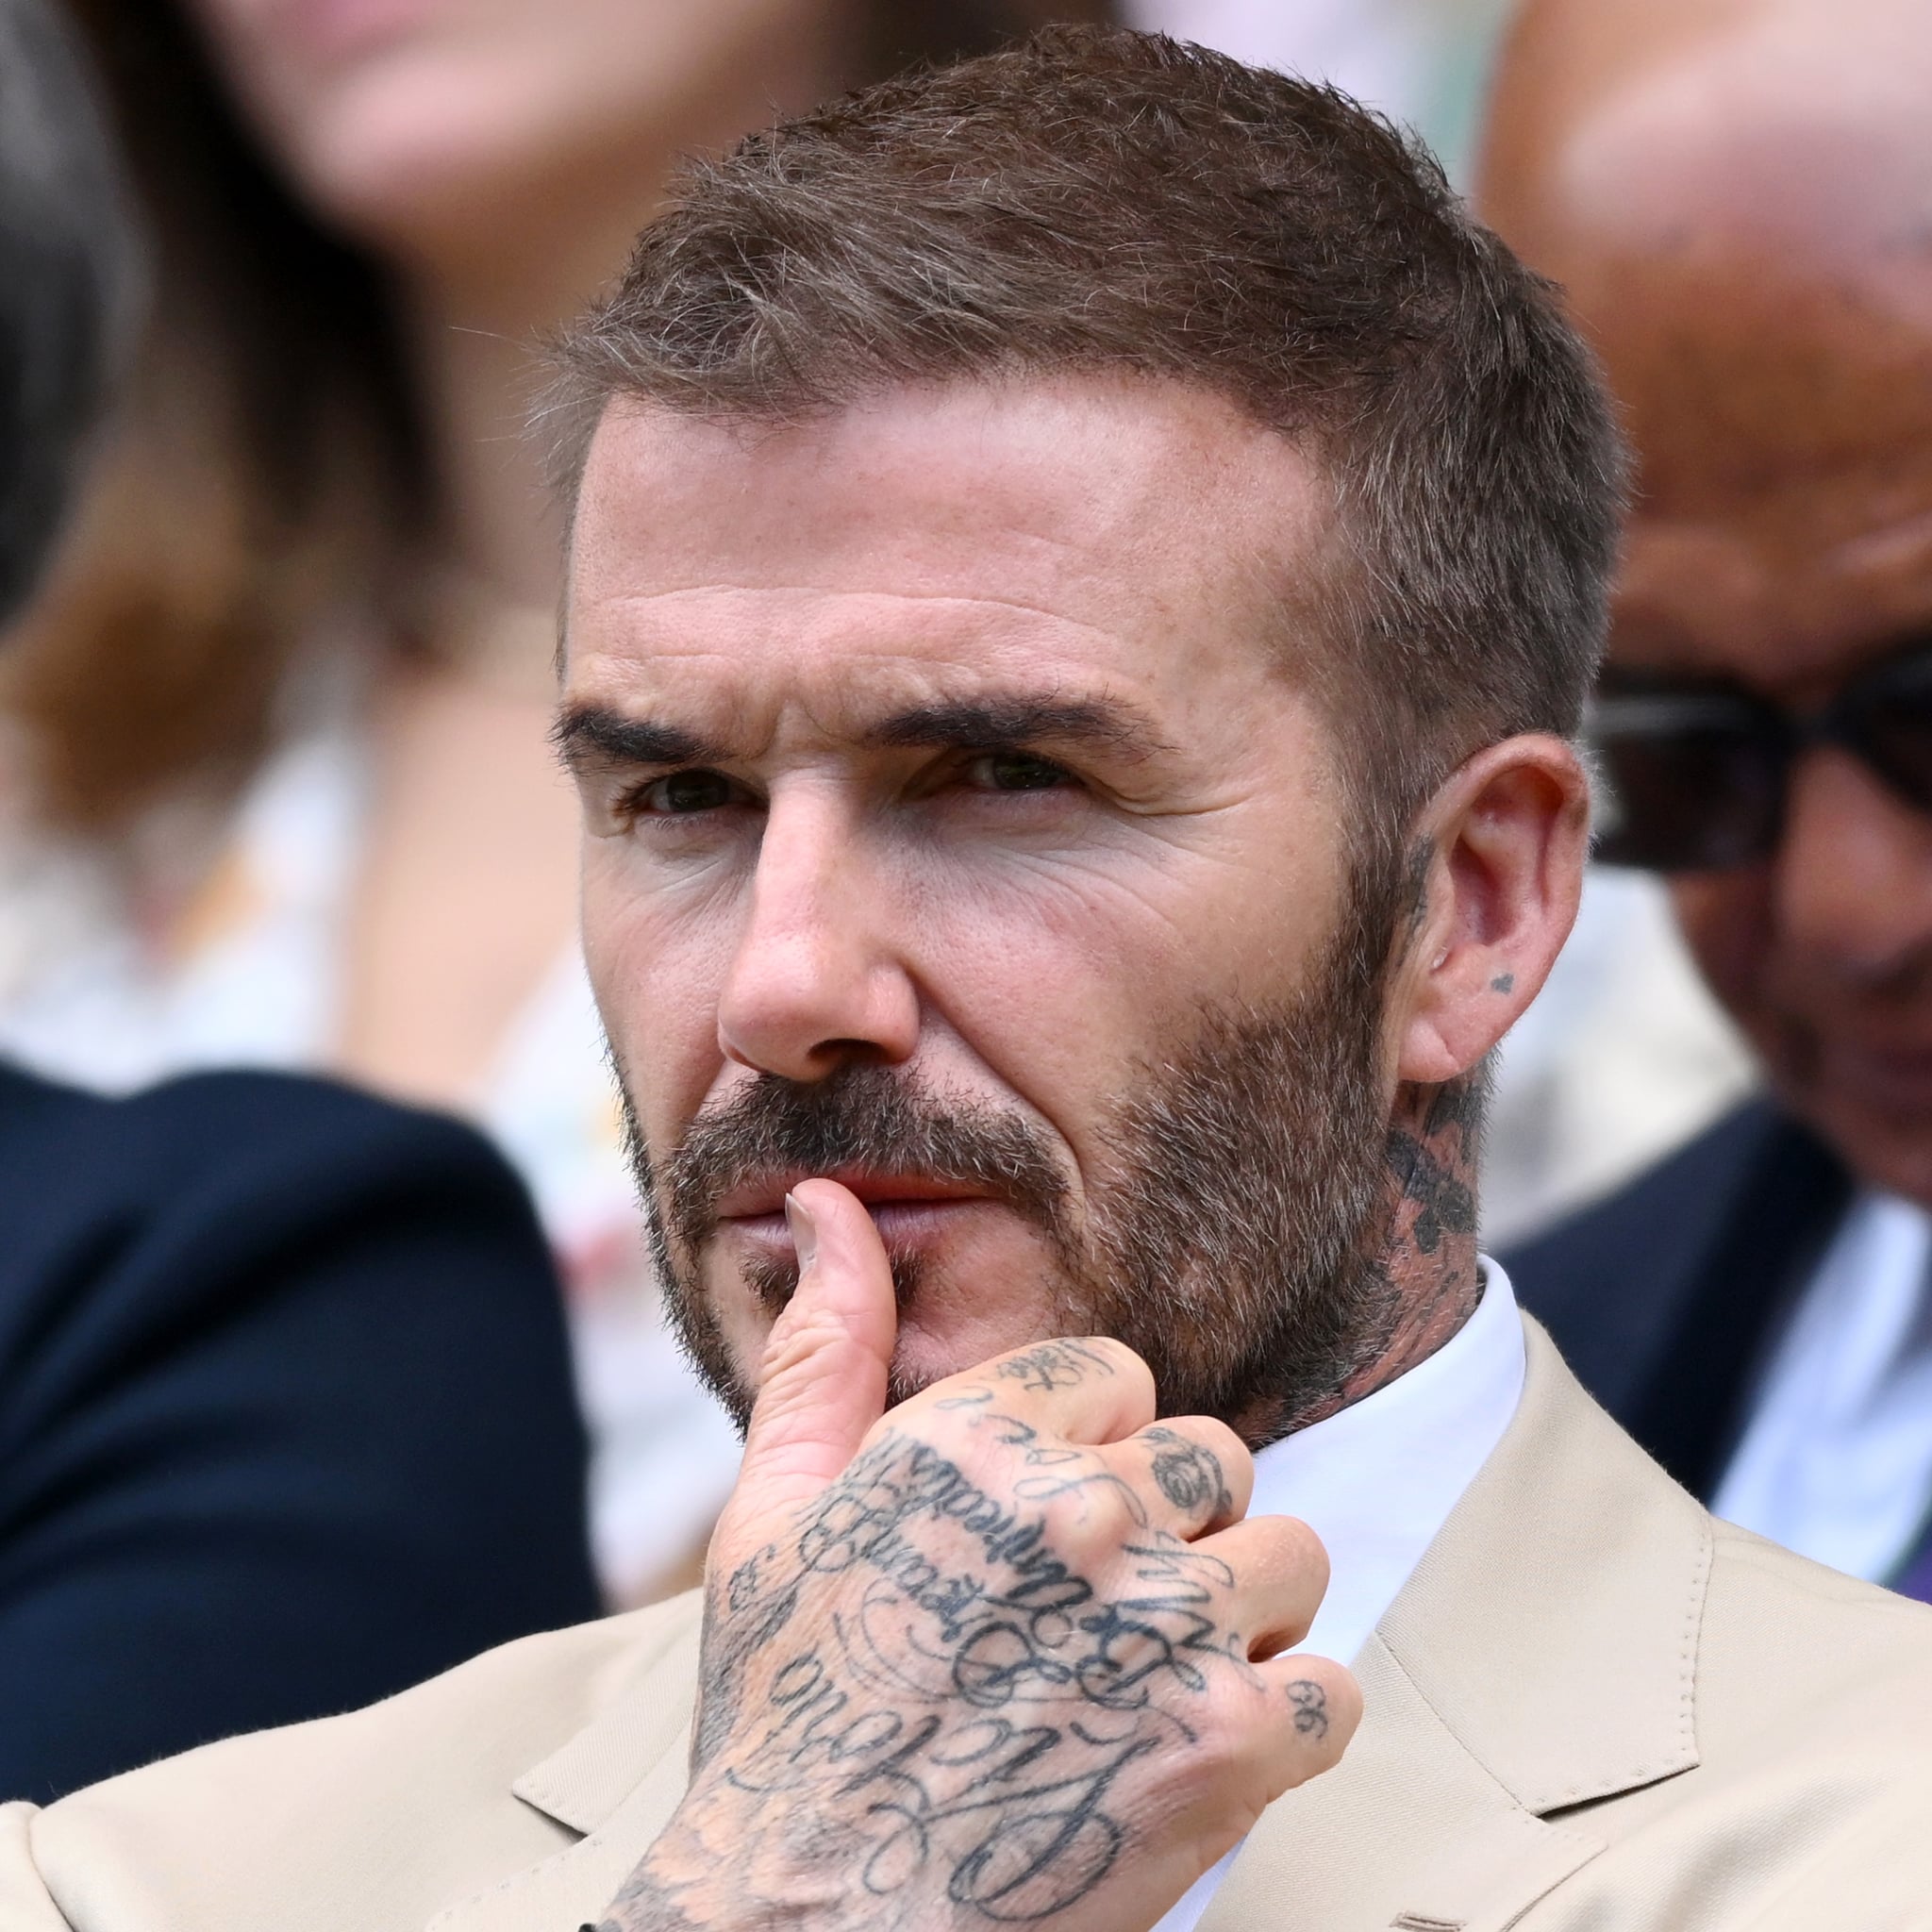 David Beckham's tattoos and the meanings behind them